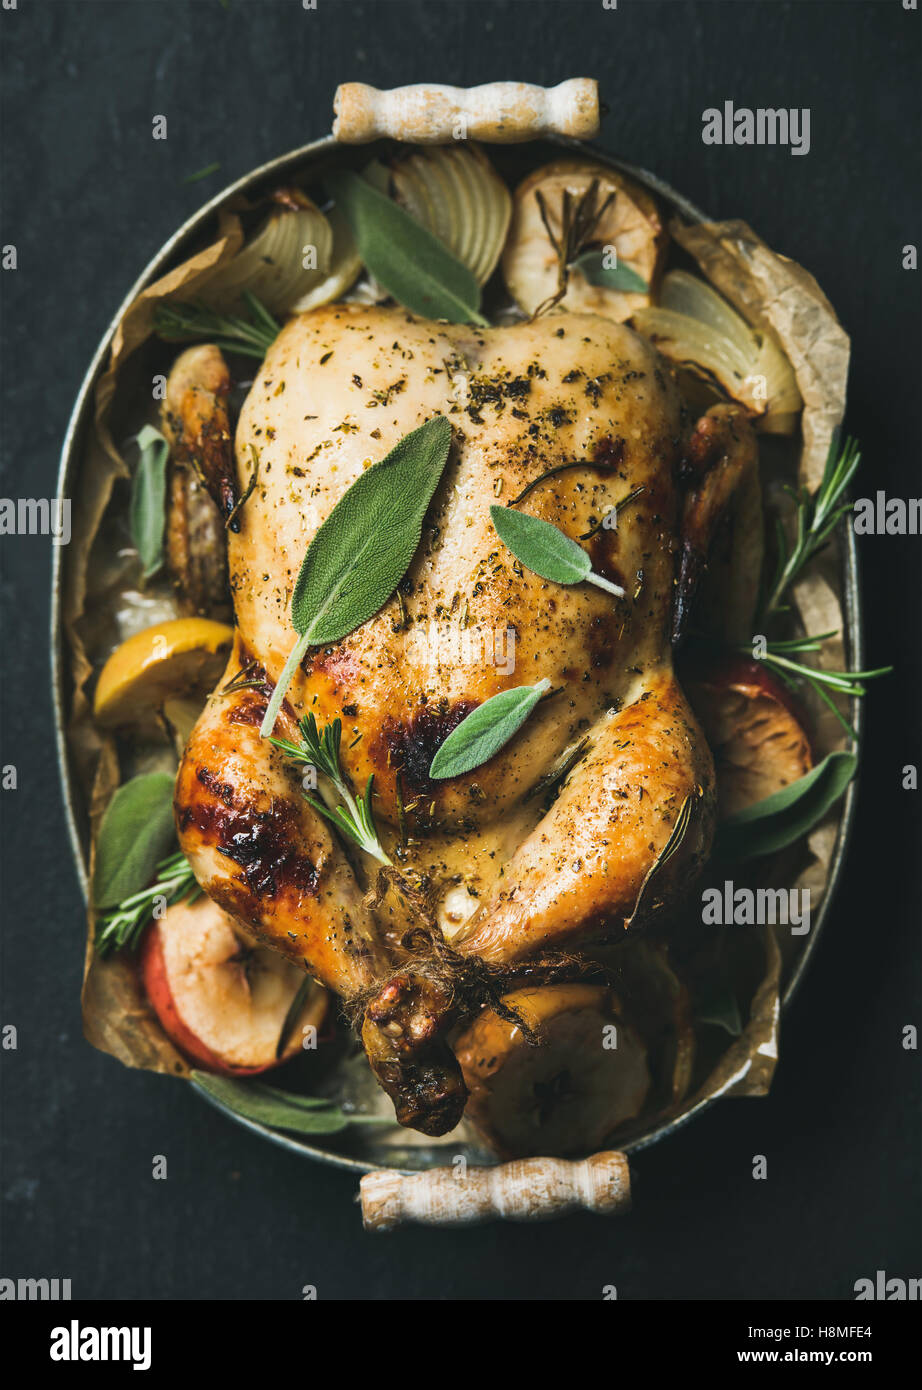 Oven roasted whole chicken with apples, onion and sage Stock Photo